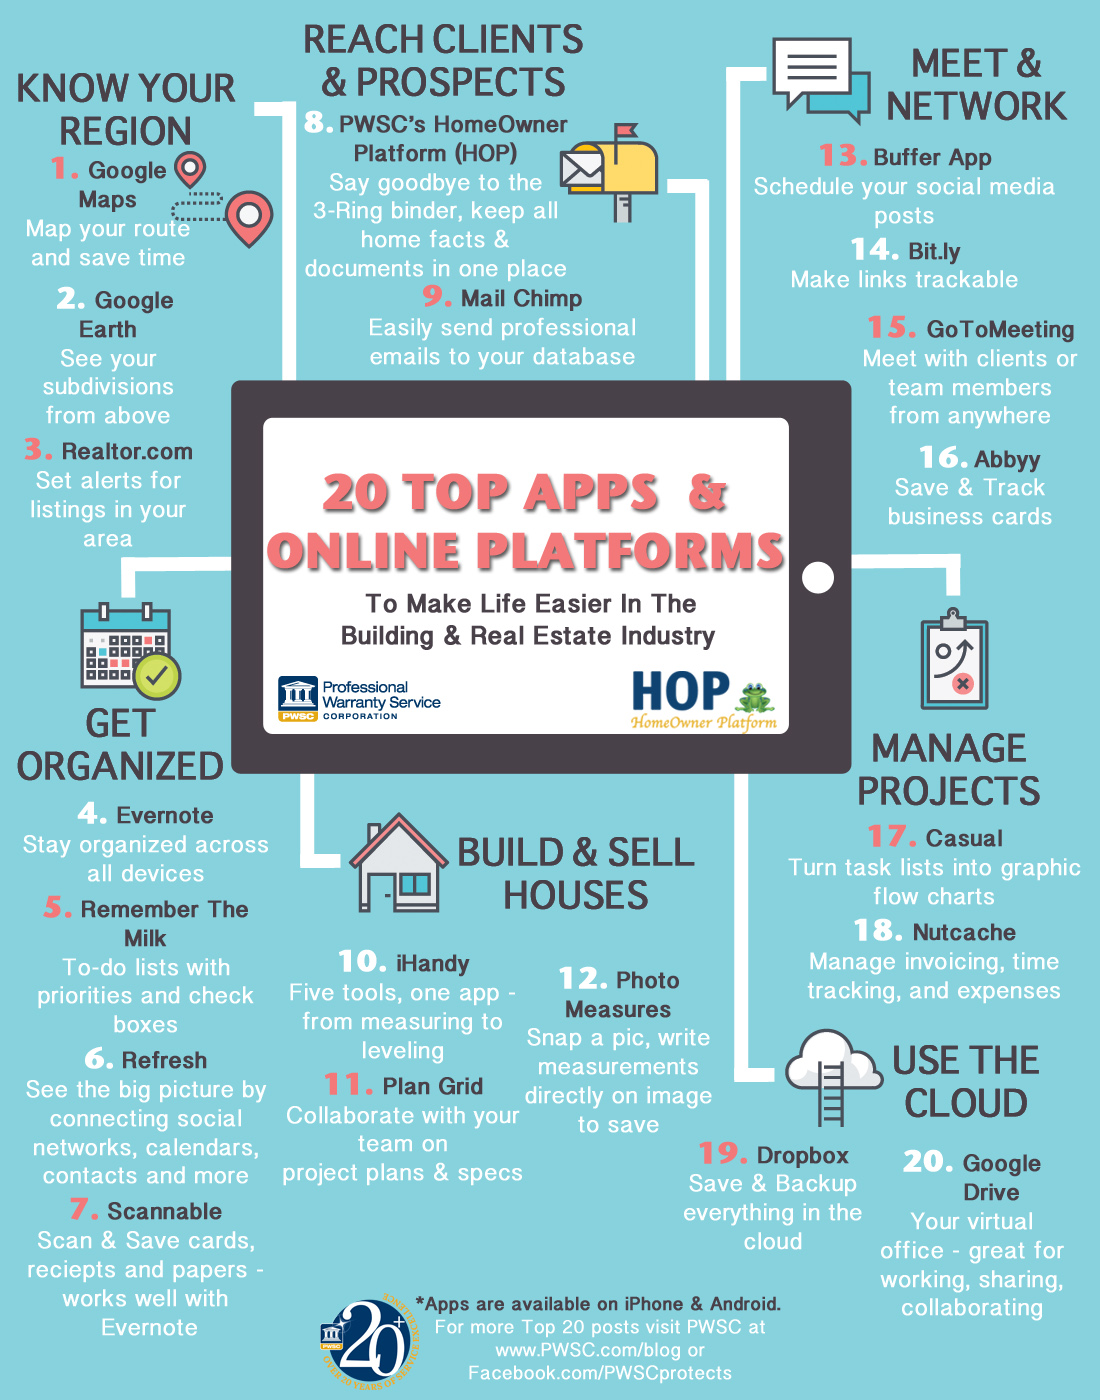 PWSC Top Apps for Builders and Realtors